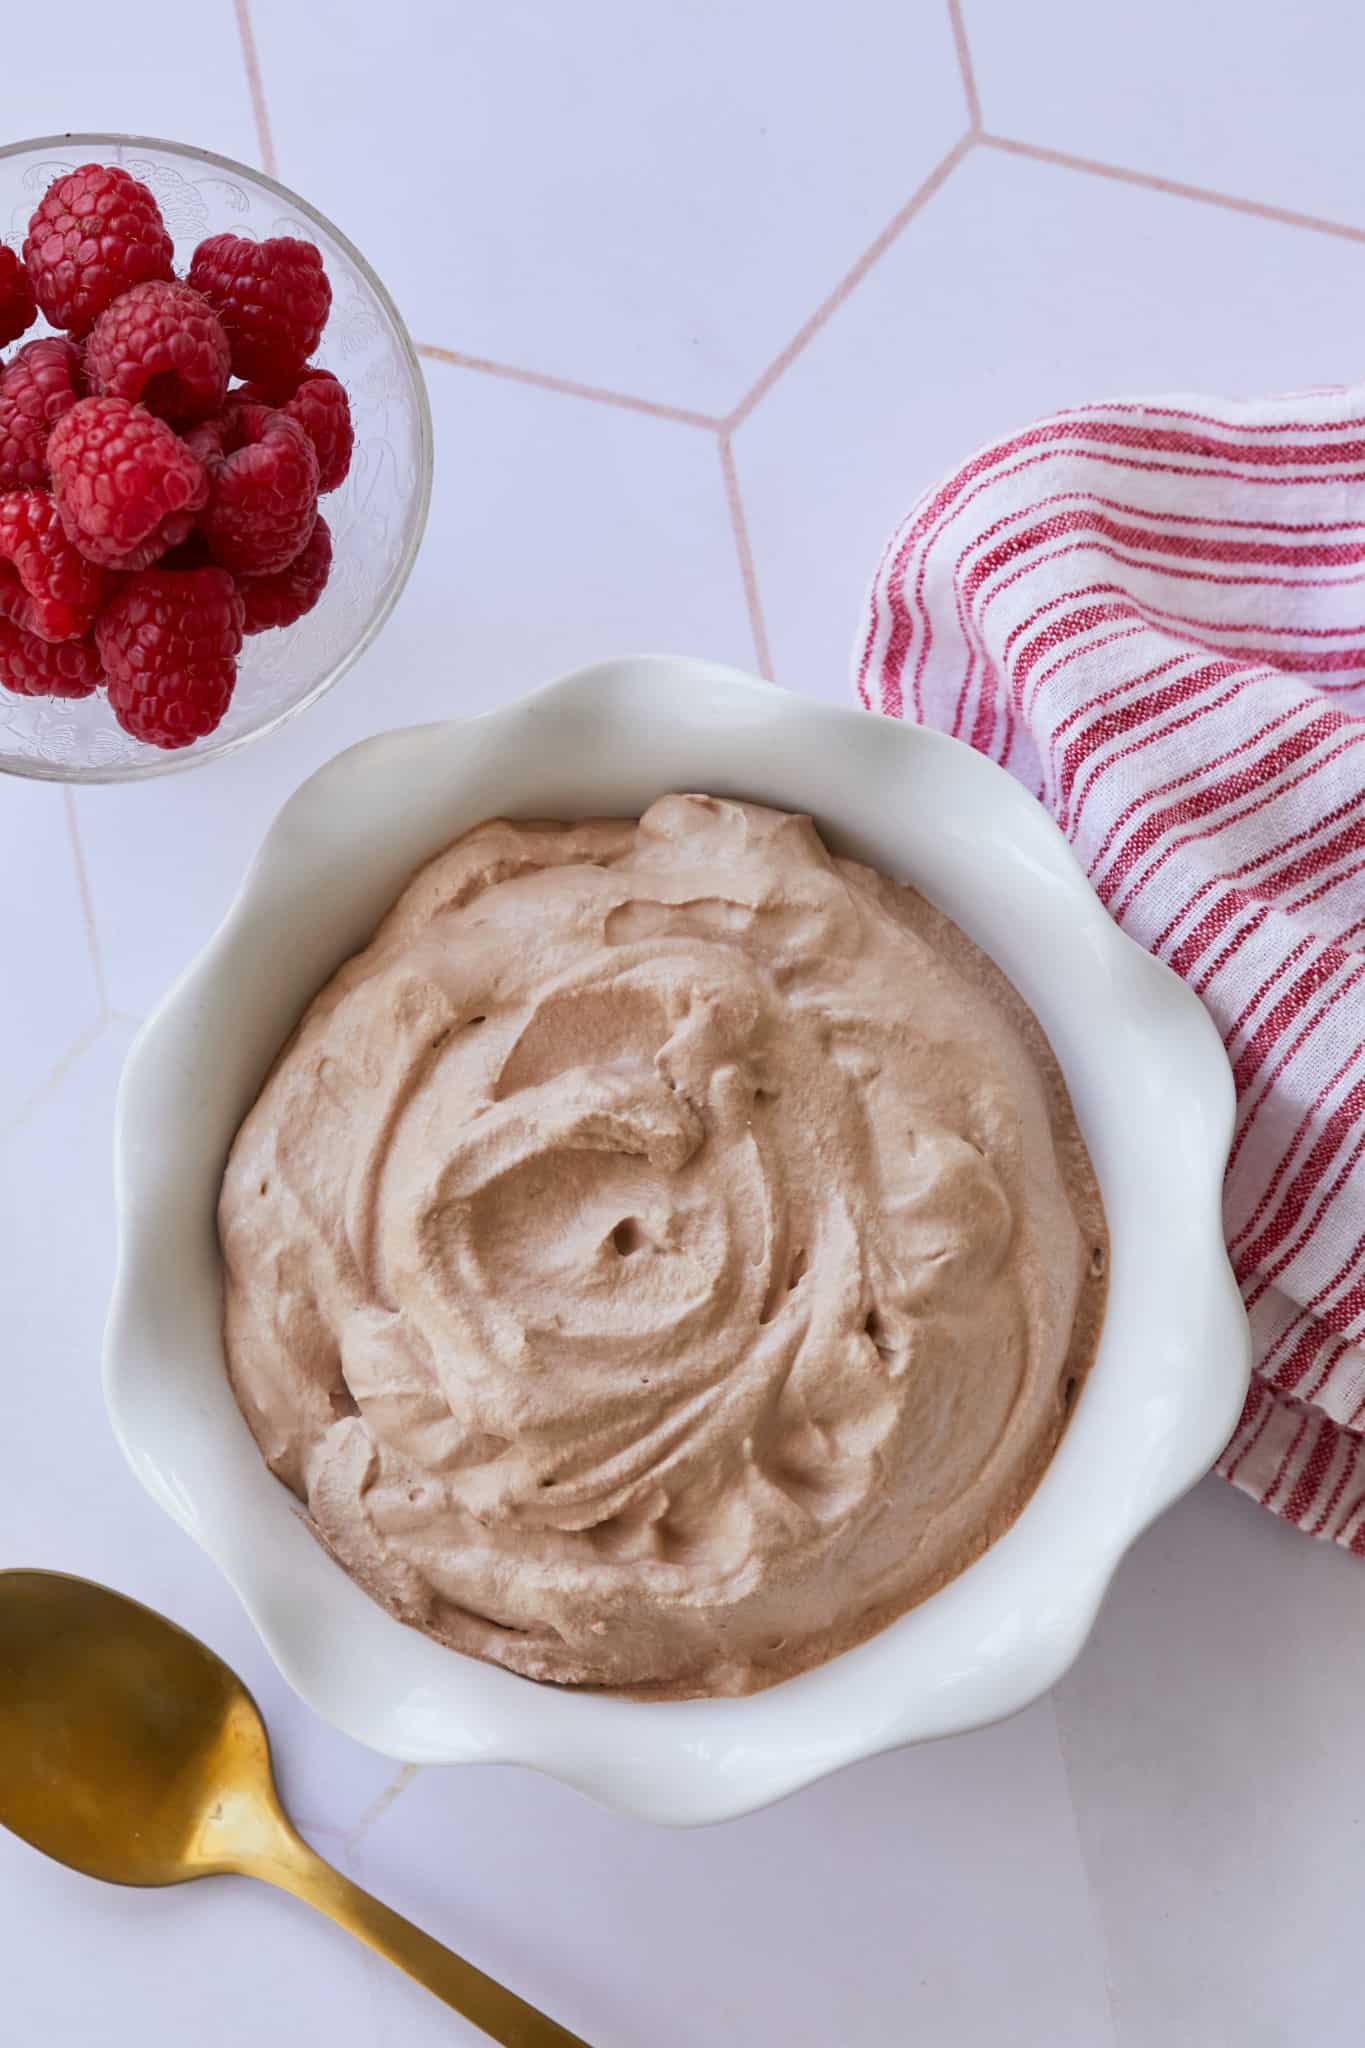 A while bowl filled with chocolate whipped cream sits besides a bowl of raspberries.